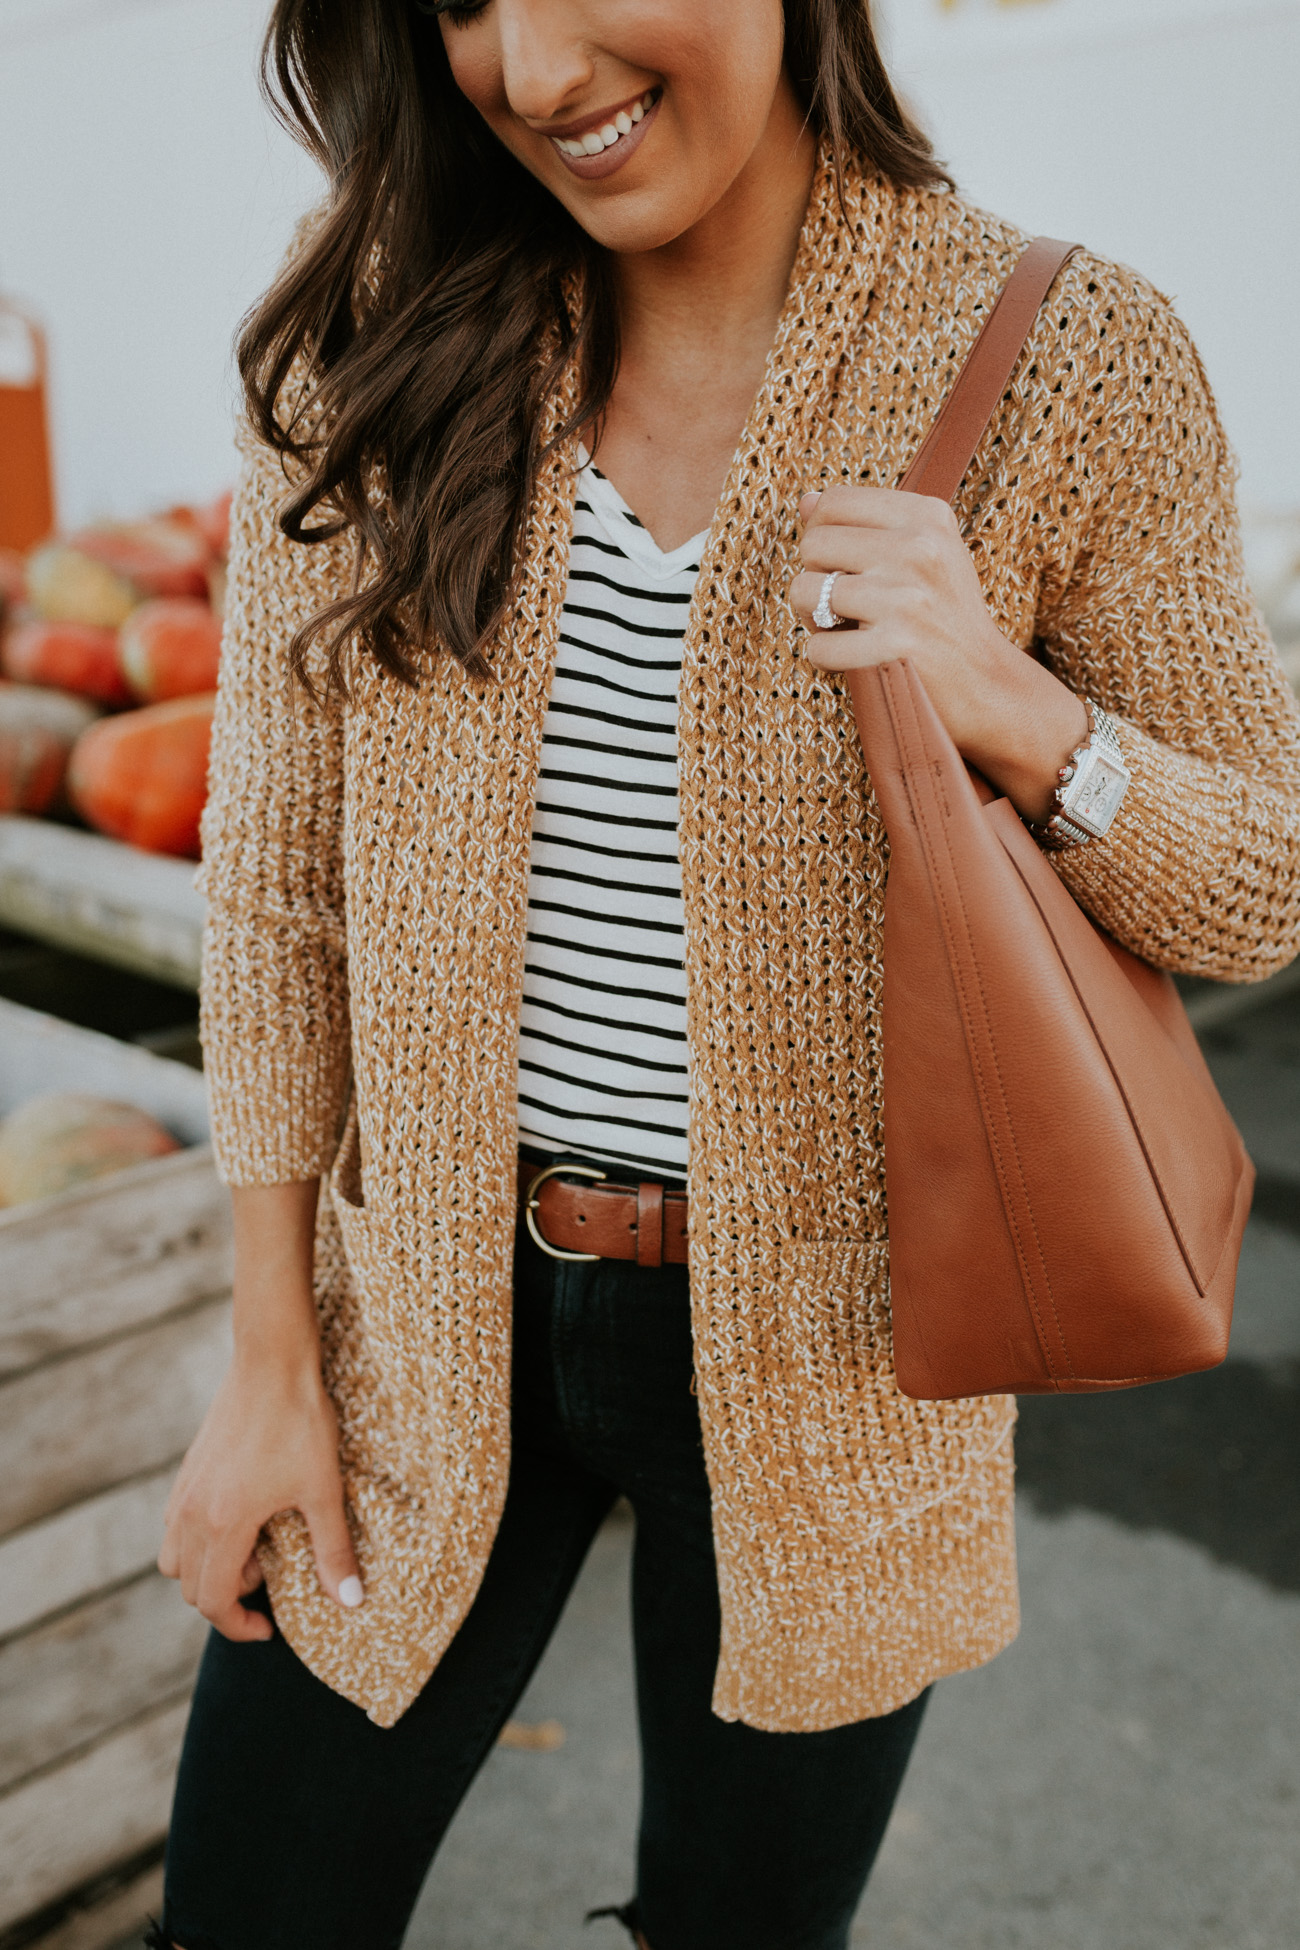 marled cardigan, pumpkin patch outfit, fall style, fall fashion, wedge sneakers, madewell transport tote, stripe outfit, fall stripes, cute fall outfit // grace white a southern drawl